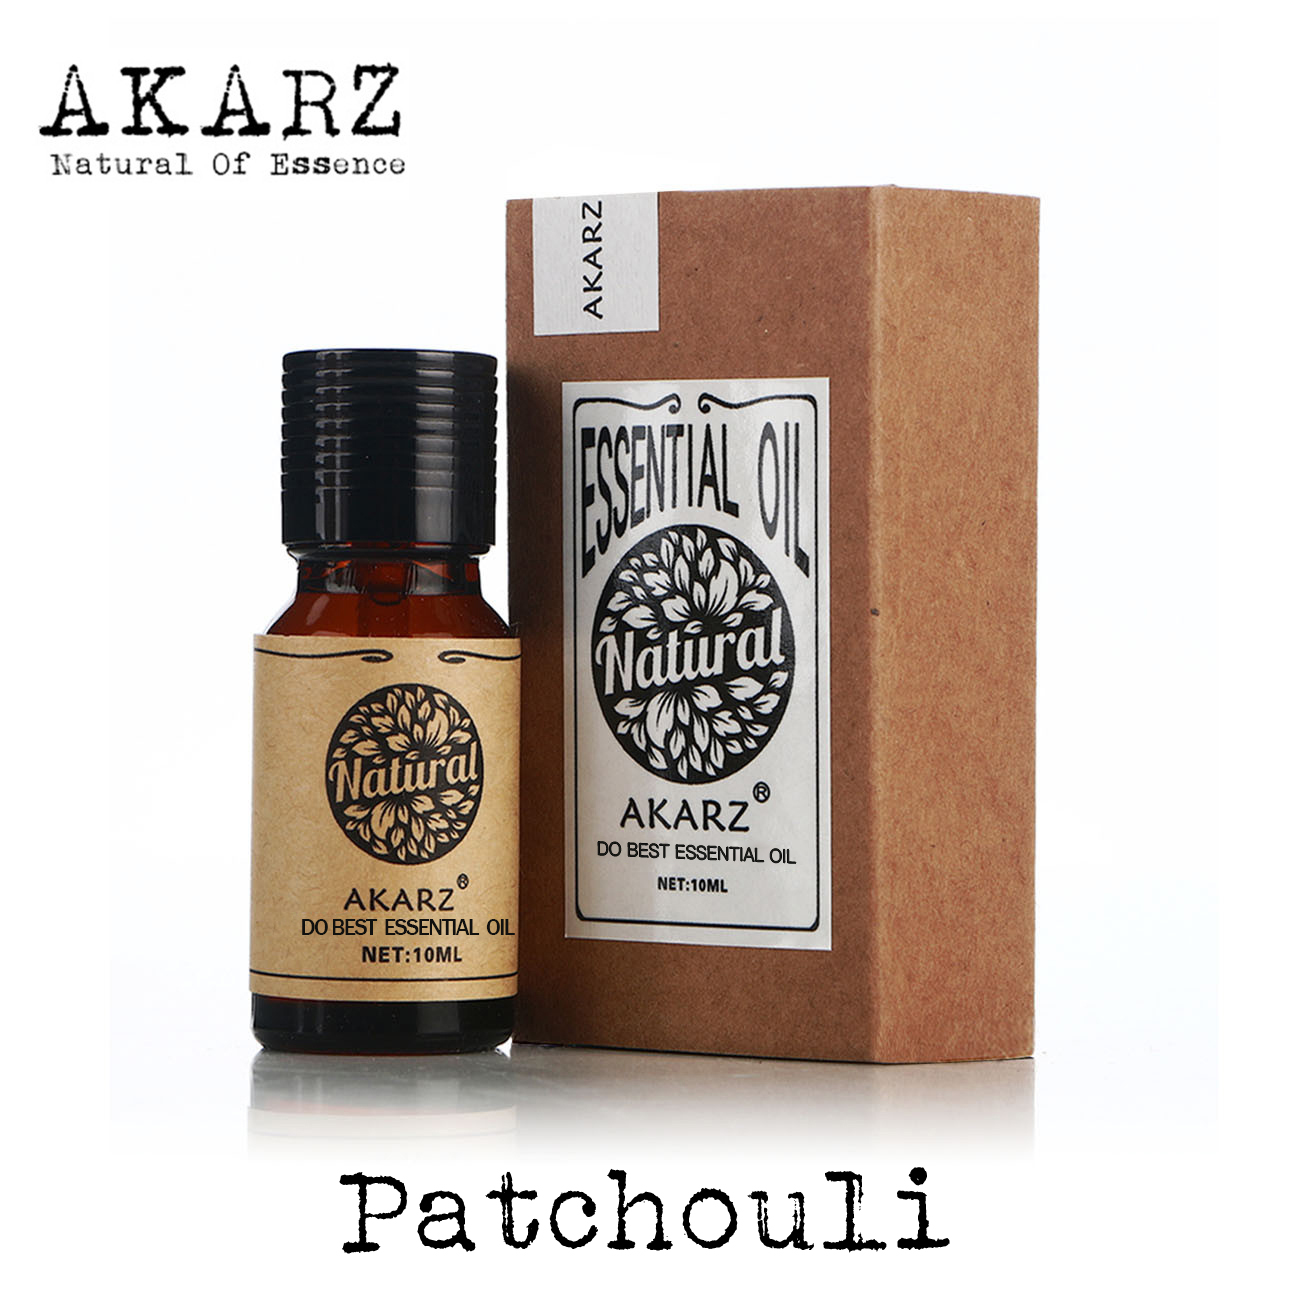 AKARZ Famous brand patchouli essential oil natural Eliminate acne relieve eczema calm removal of mosquitoes patchouli OIL